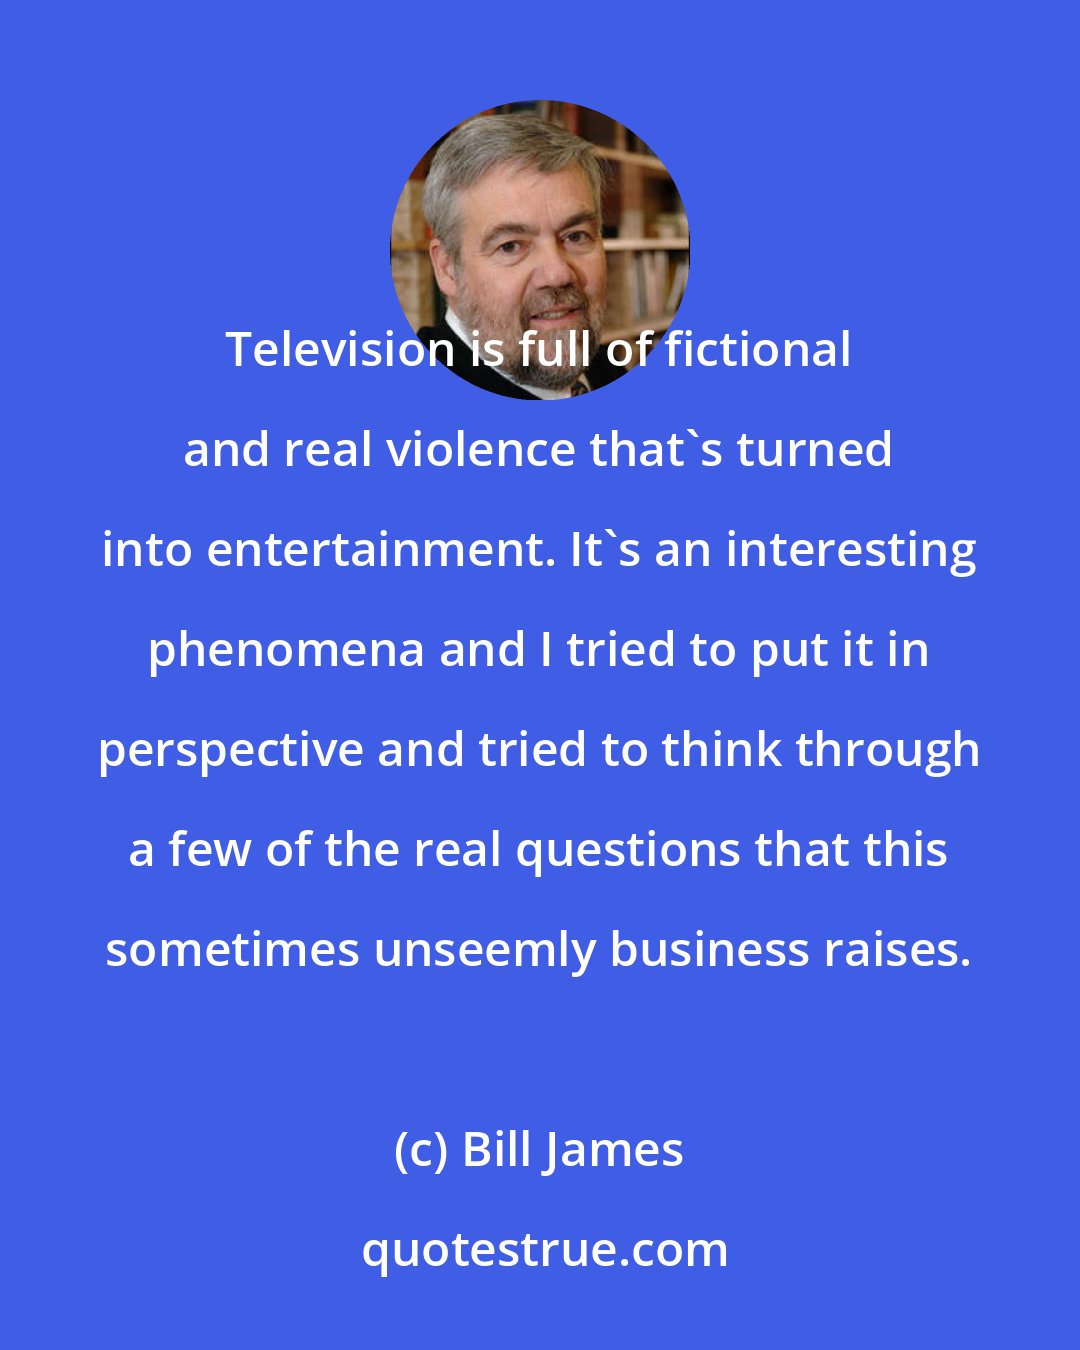 Bill James: Television is full of fictional and real violence that's turned into entertainment. It's an interesting phenomena and I tried to put it in perspective and tried to think through a few of the real questions that this sometimes unseemly business raises.